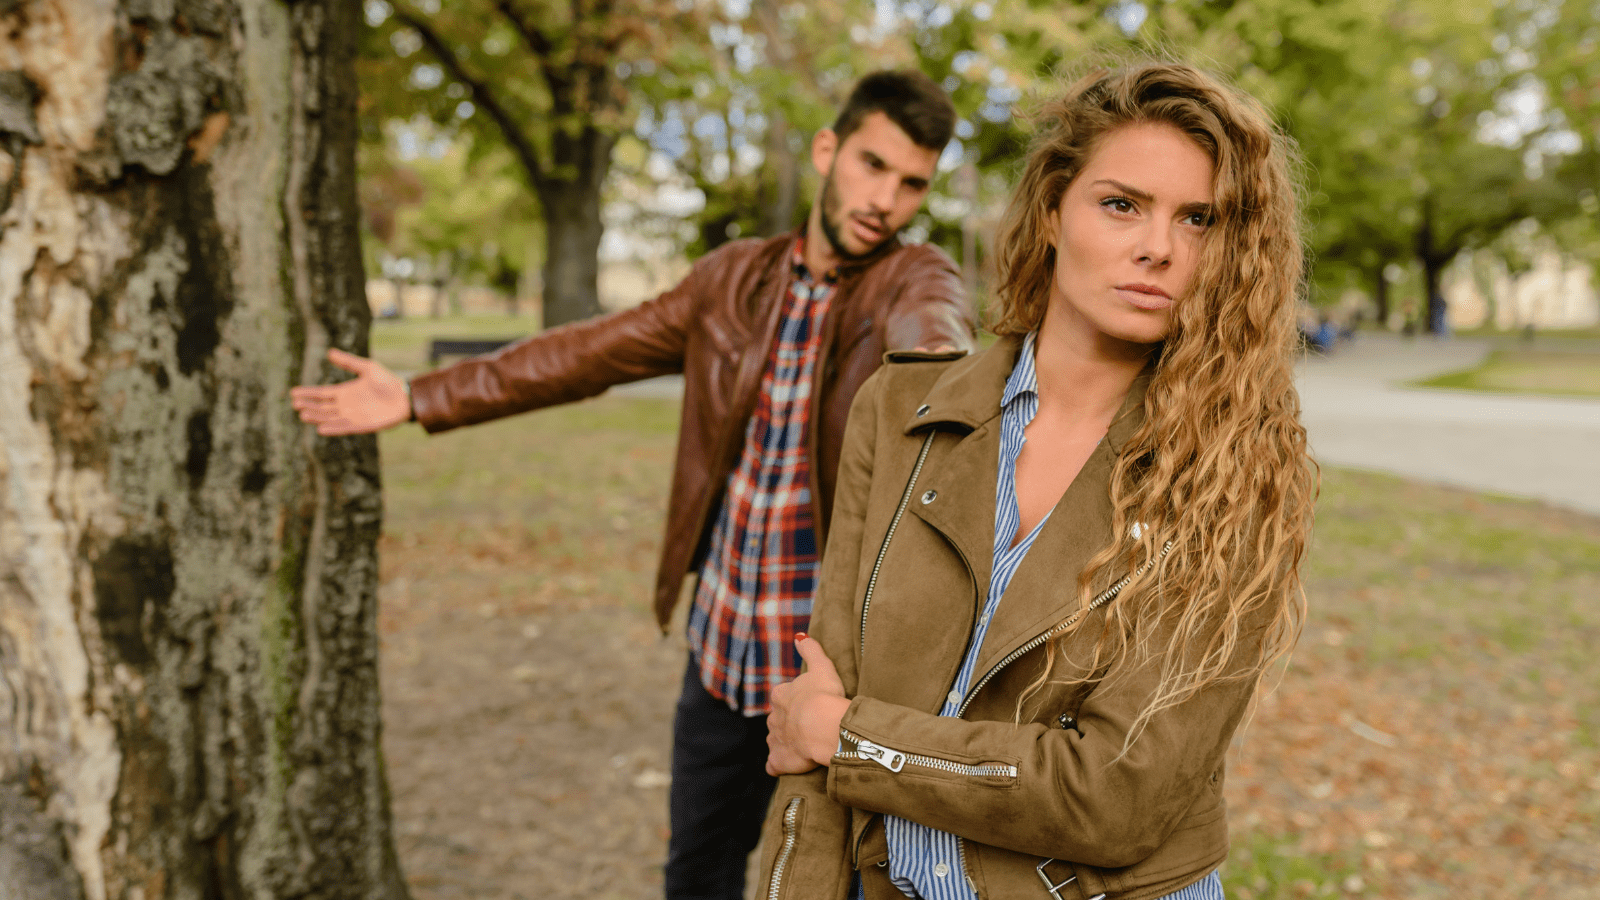 Woman And Man Wearing Brown Jackets Standing Near Tree(opens in a new tab or window)View more byWoman And Man Wearing Brown Jackets Standing Near Trree